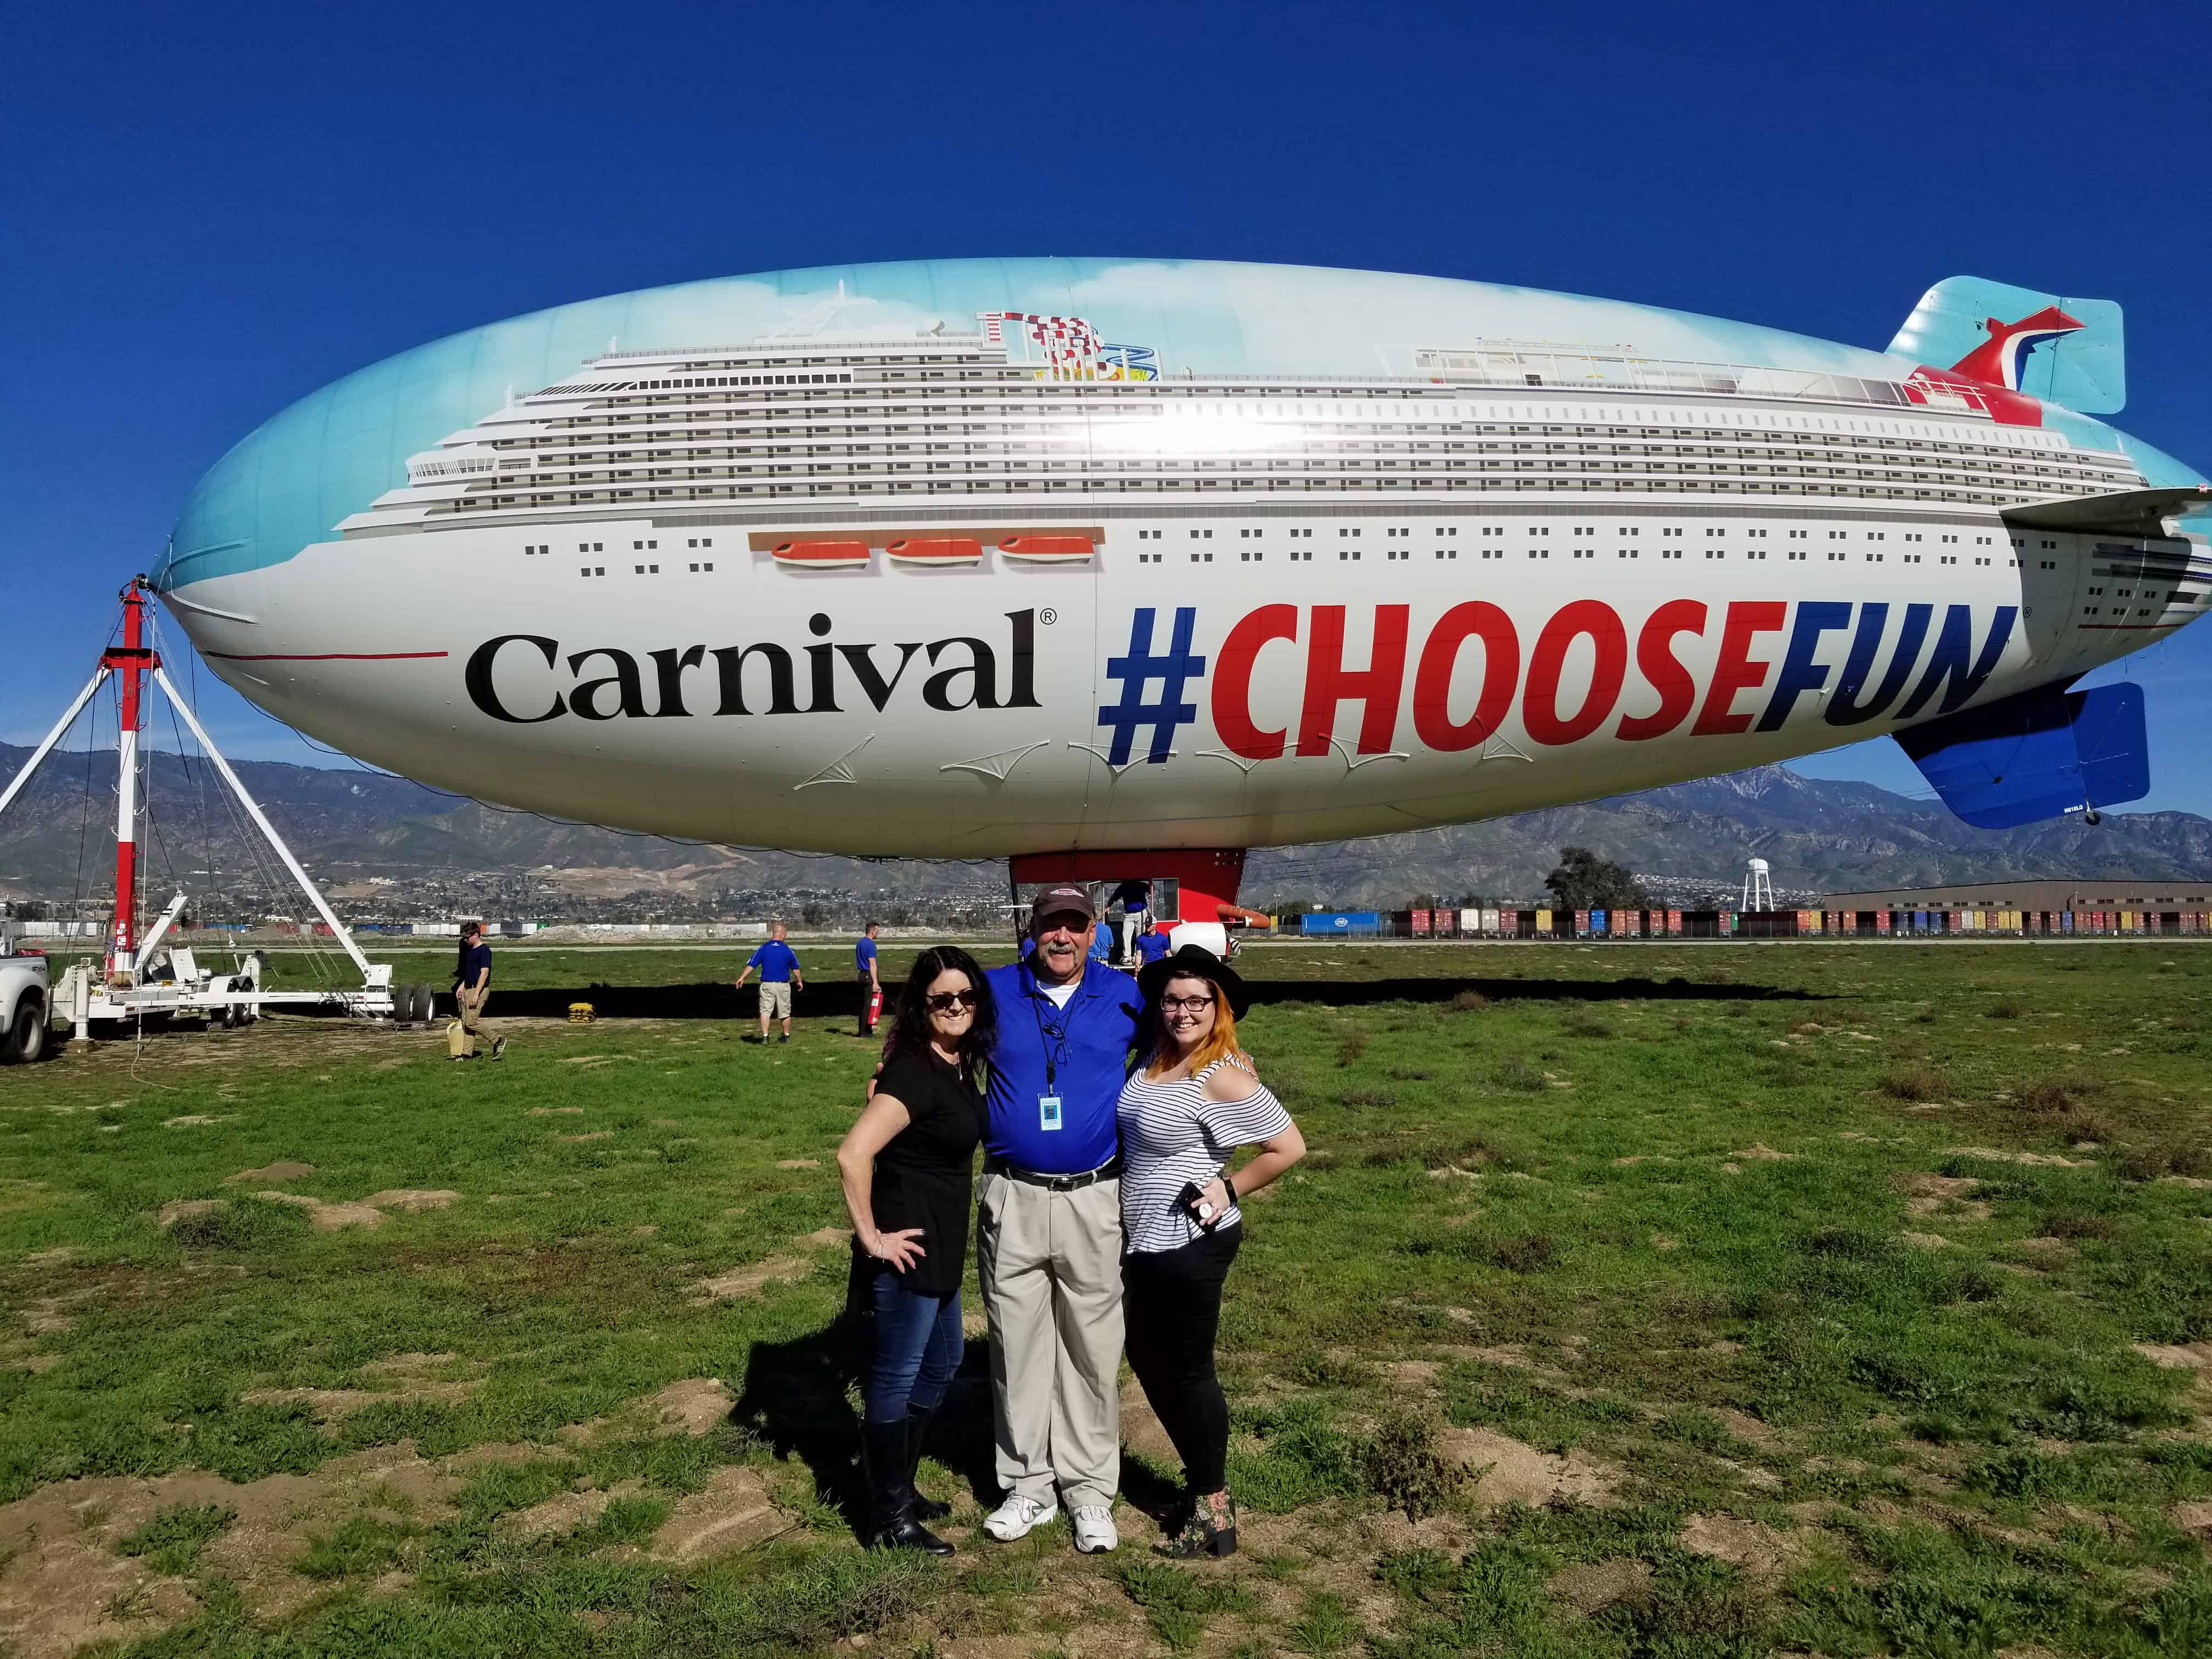 How Do Blimps Work? We Rode With Carnival Cruise!